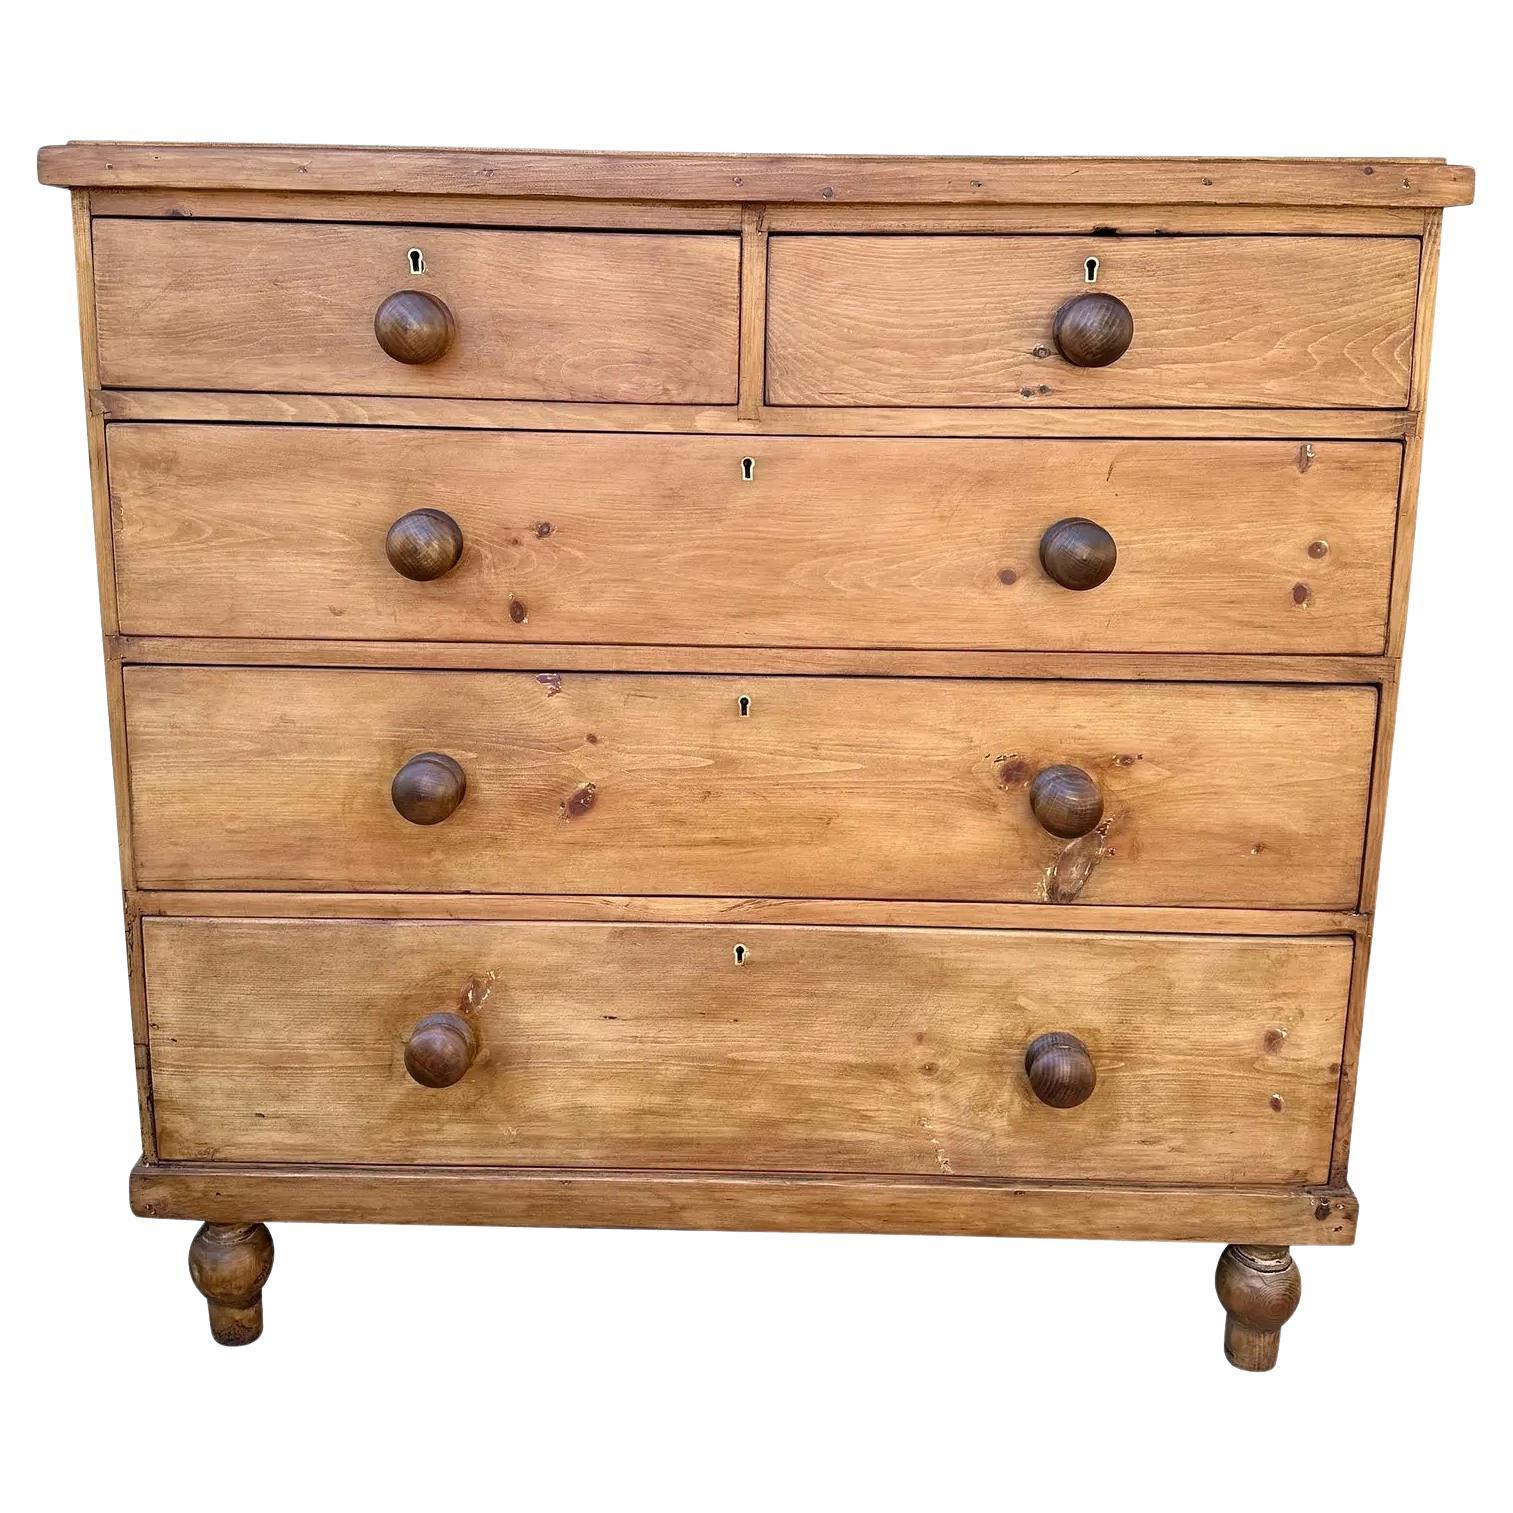 19th Century English Pine Chest For Sale